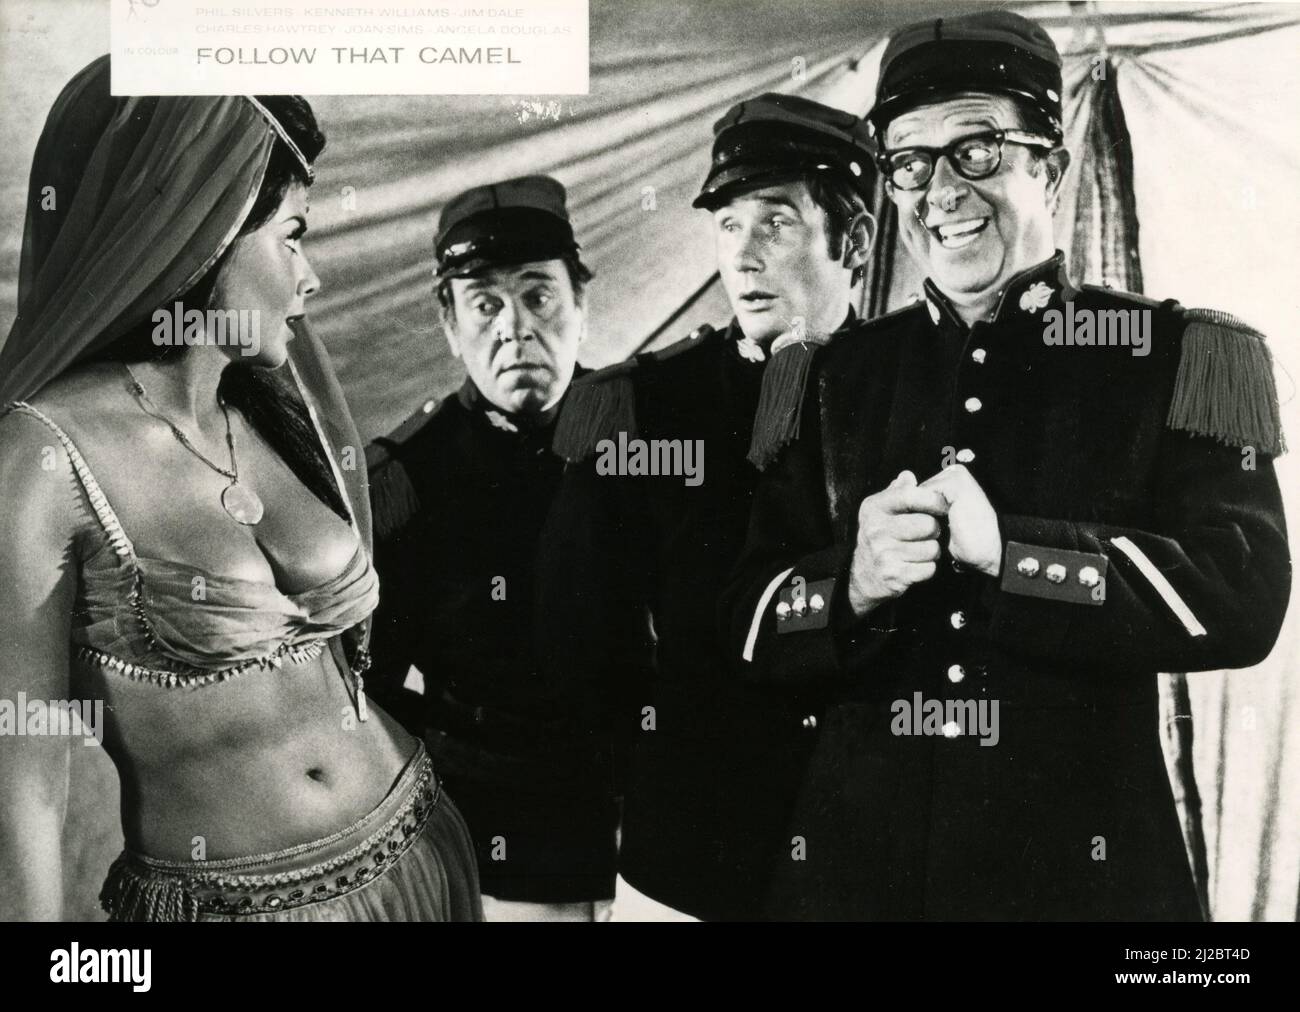 English actors Peter Butterworth and Jim Dale, and American entertainer Phil Silvers in the movie Follow That Camel, UK 1967 Stock Photo